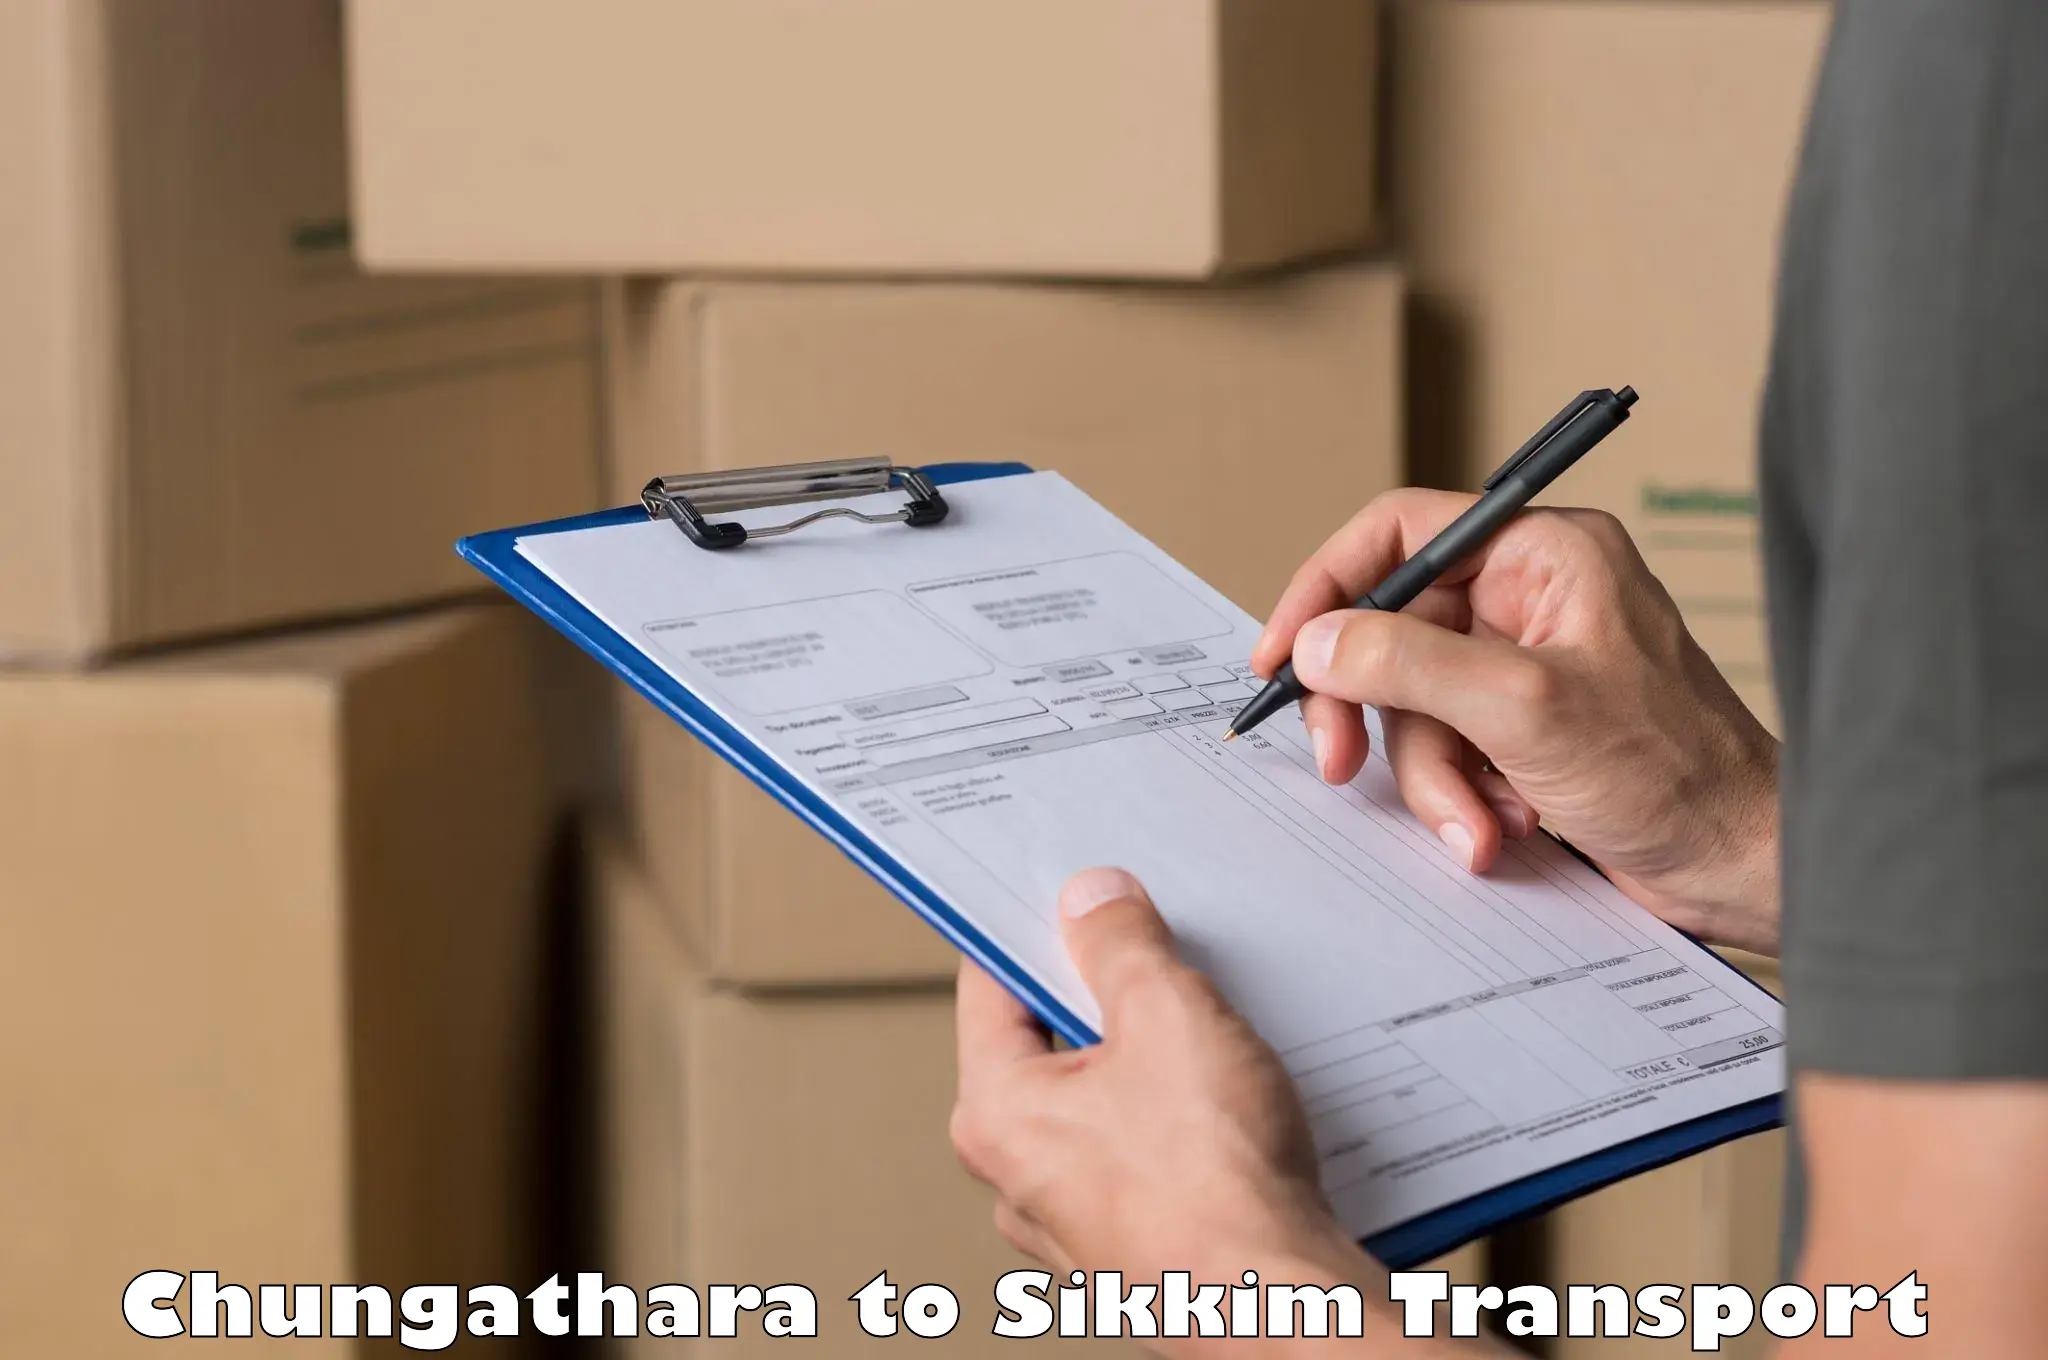 Daily parcel service transport Chungathara to North Sikkim